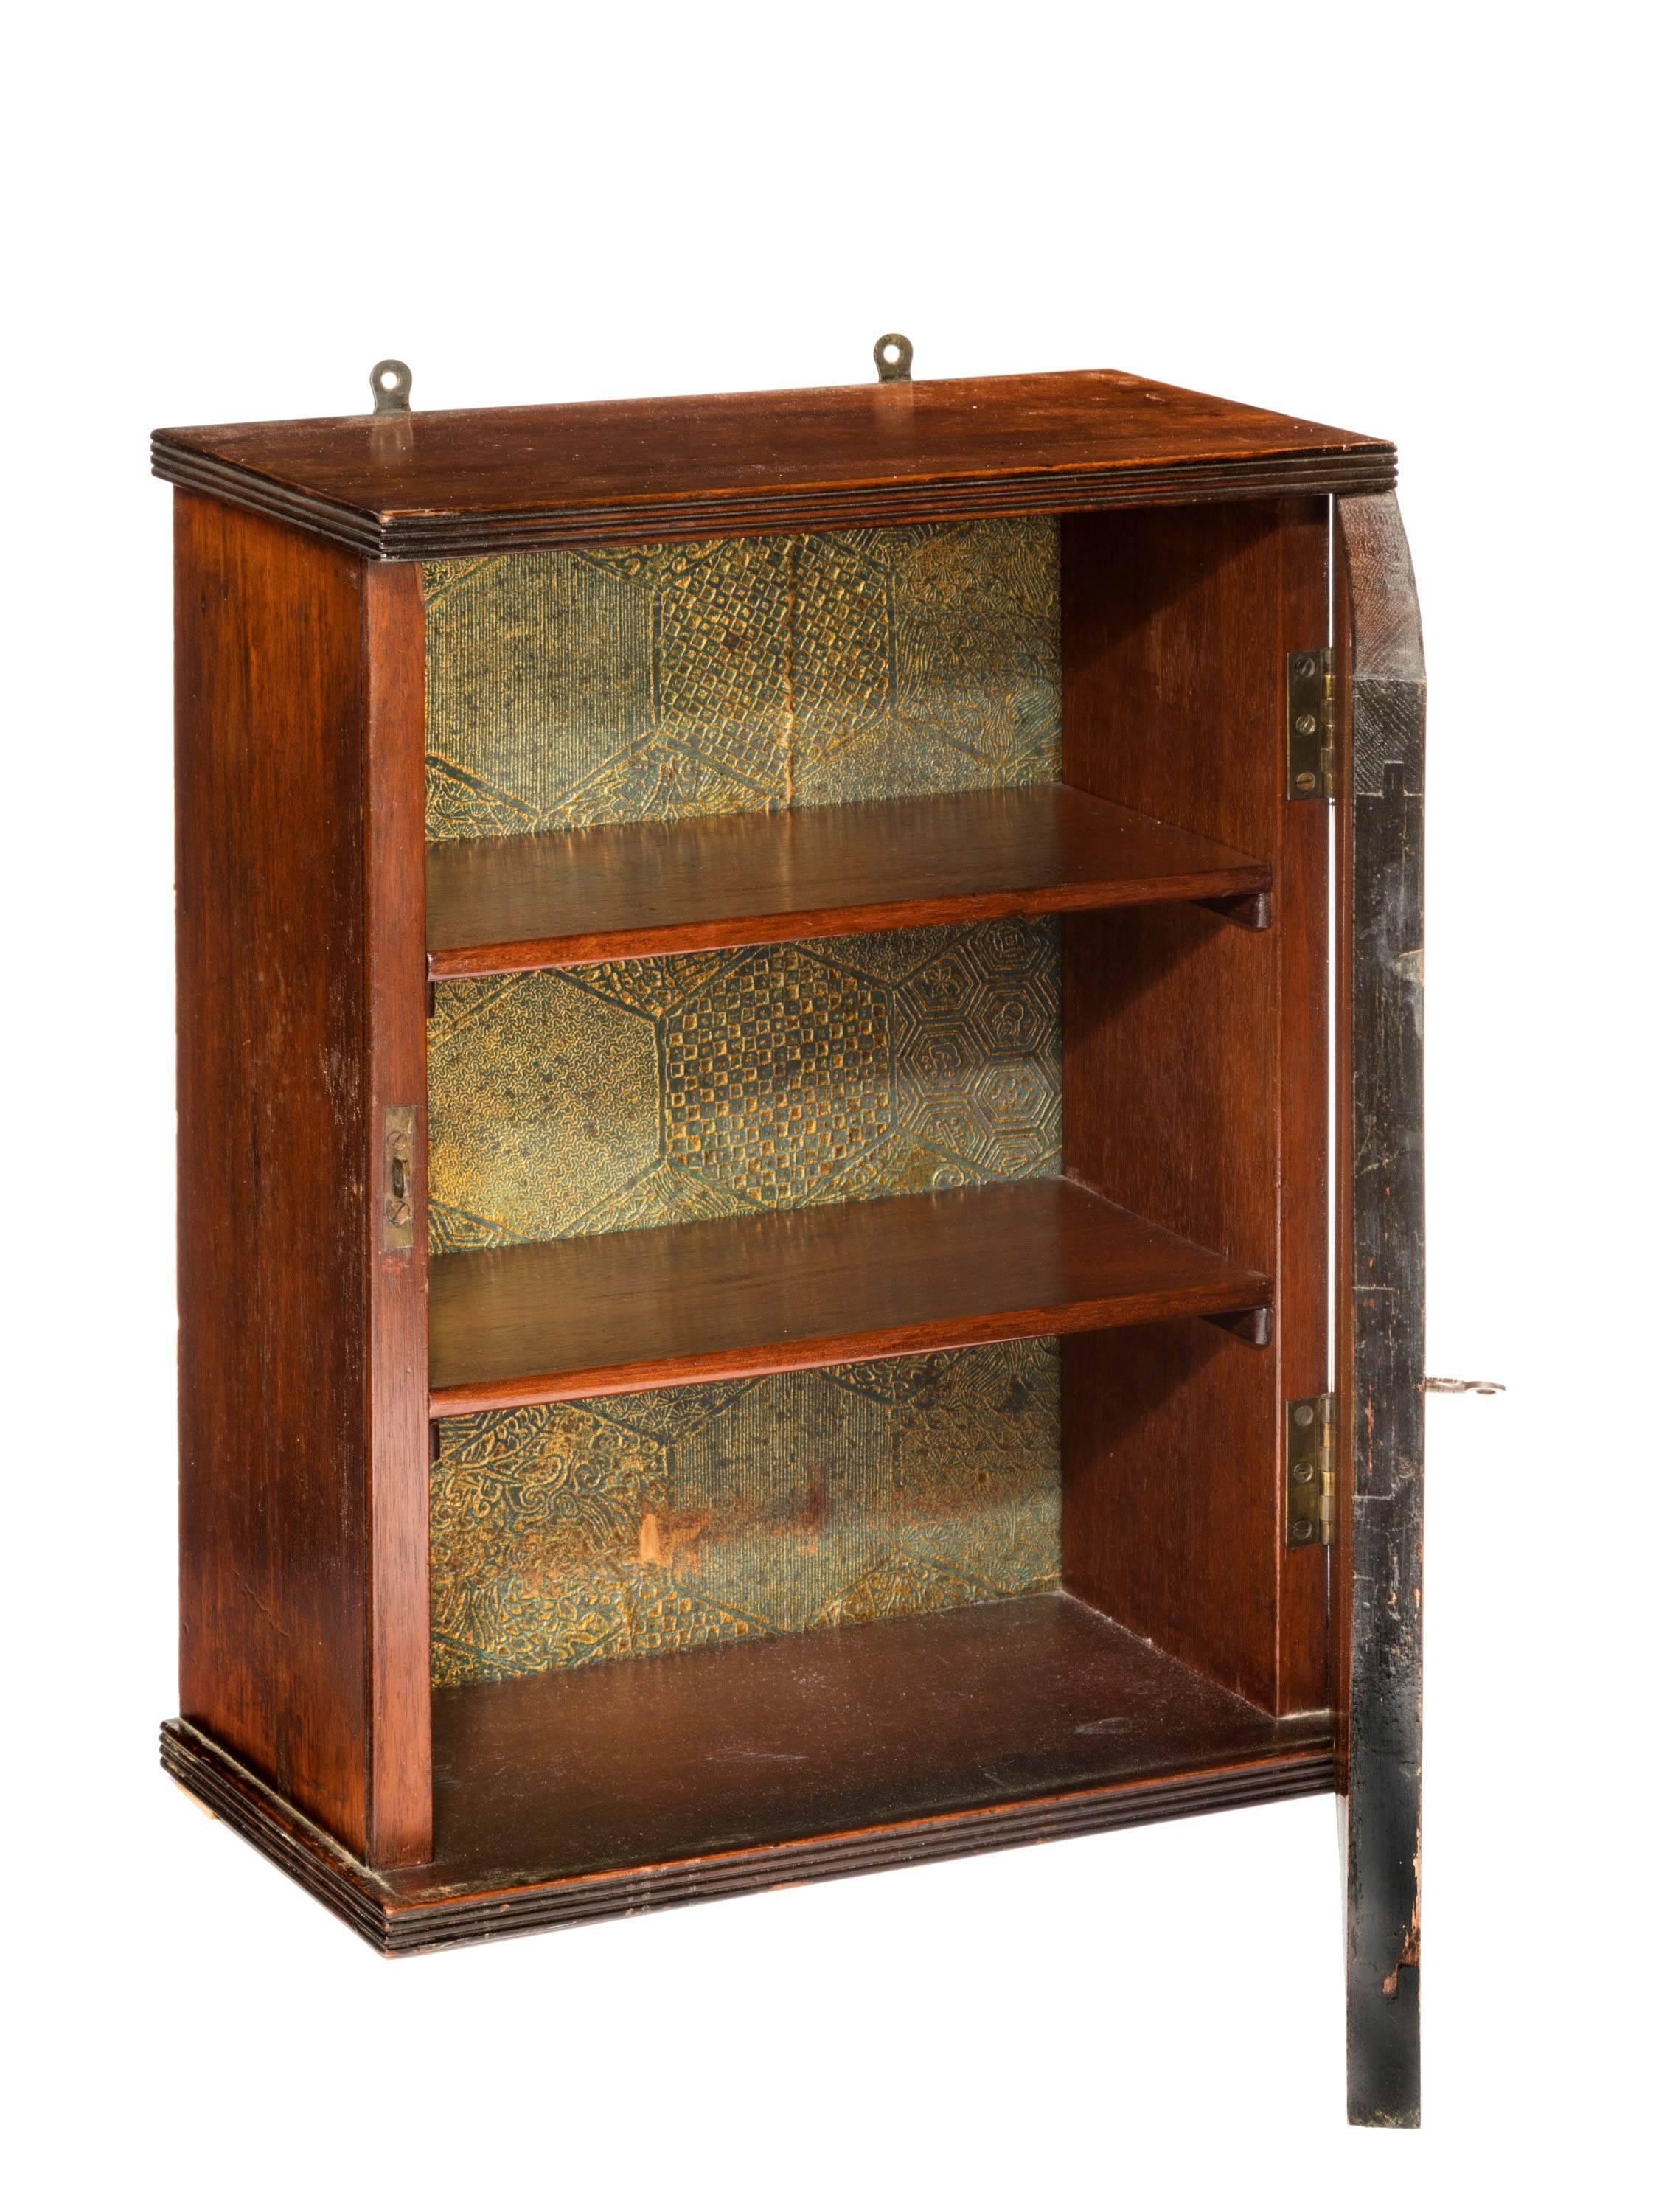 English Late 19th Century Wall Hanging Cabinet in Finely Cut Timbers